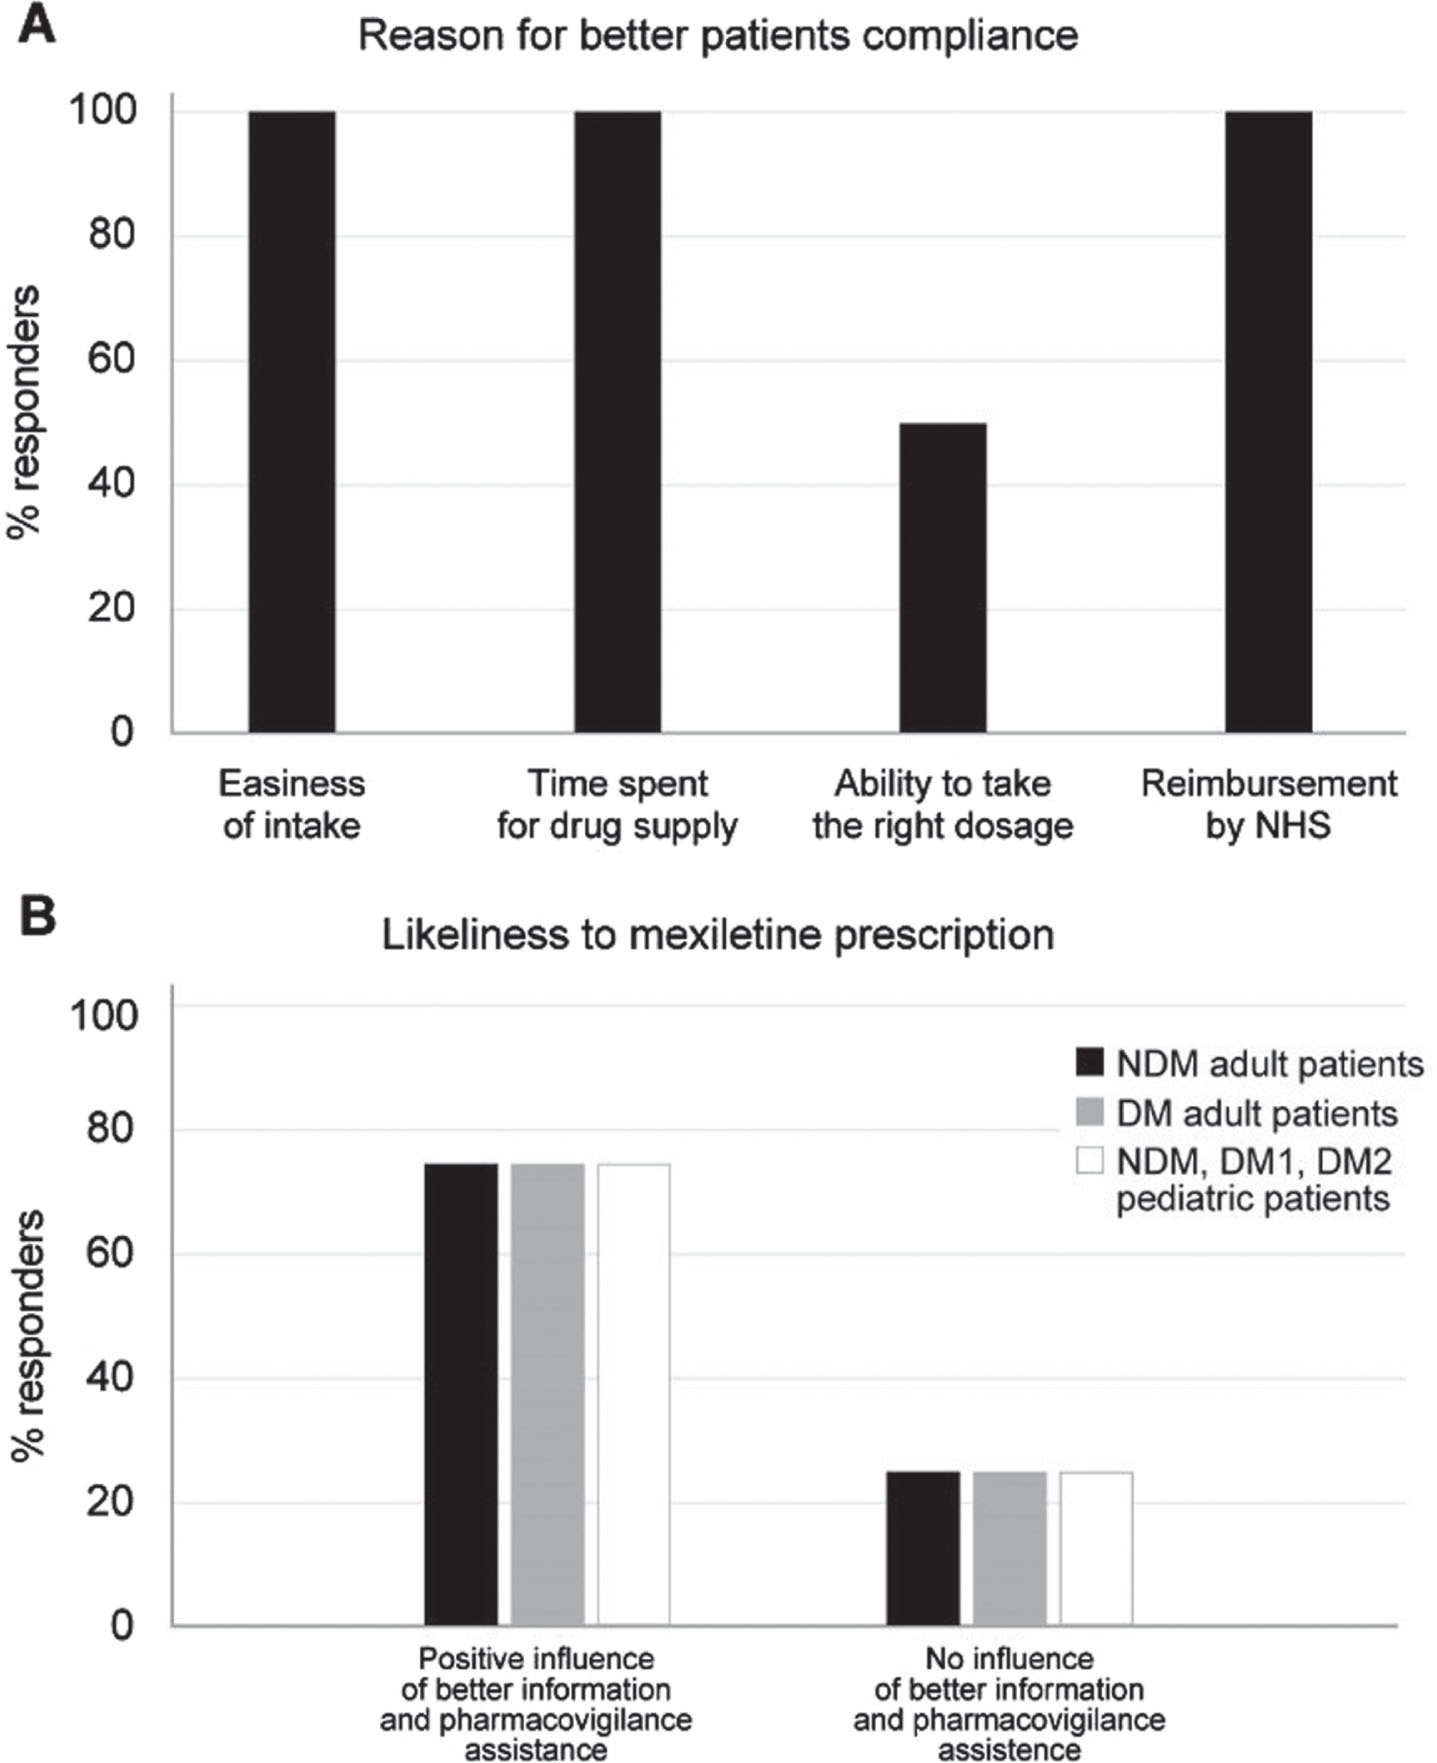 (A) Reason for improved patient compliance to mexiletine in the opinion of the expert panelists. (B) Influence of better information to patients and presence of pharmacovigilance assistance on the likeliness to mexiletine prescription to adult NDM (black bars), adult DM (gray bars) and pediatric NDM, DM1 and DM2 (white bars) patients according to experts’ opinion.